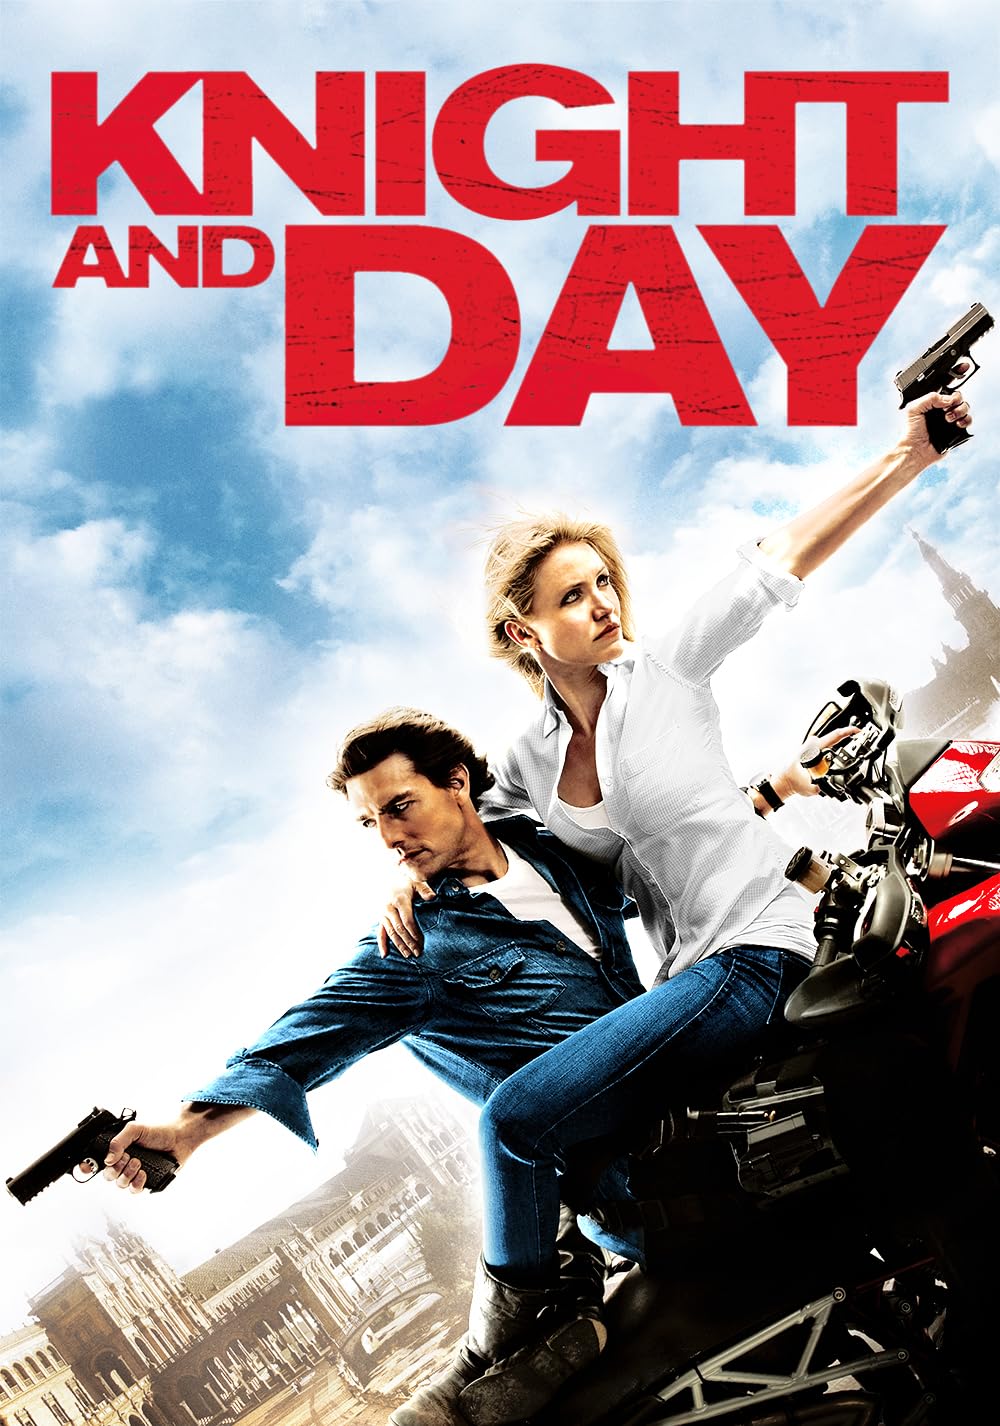 Knight And Day- action movies on netflix